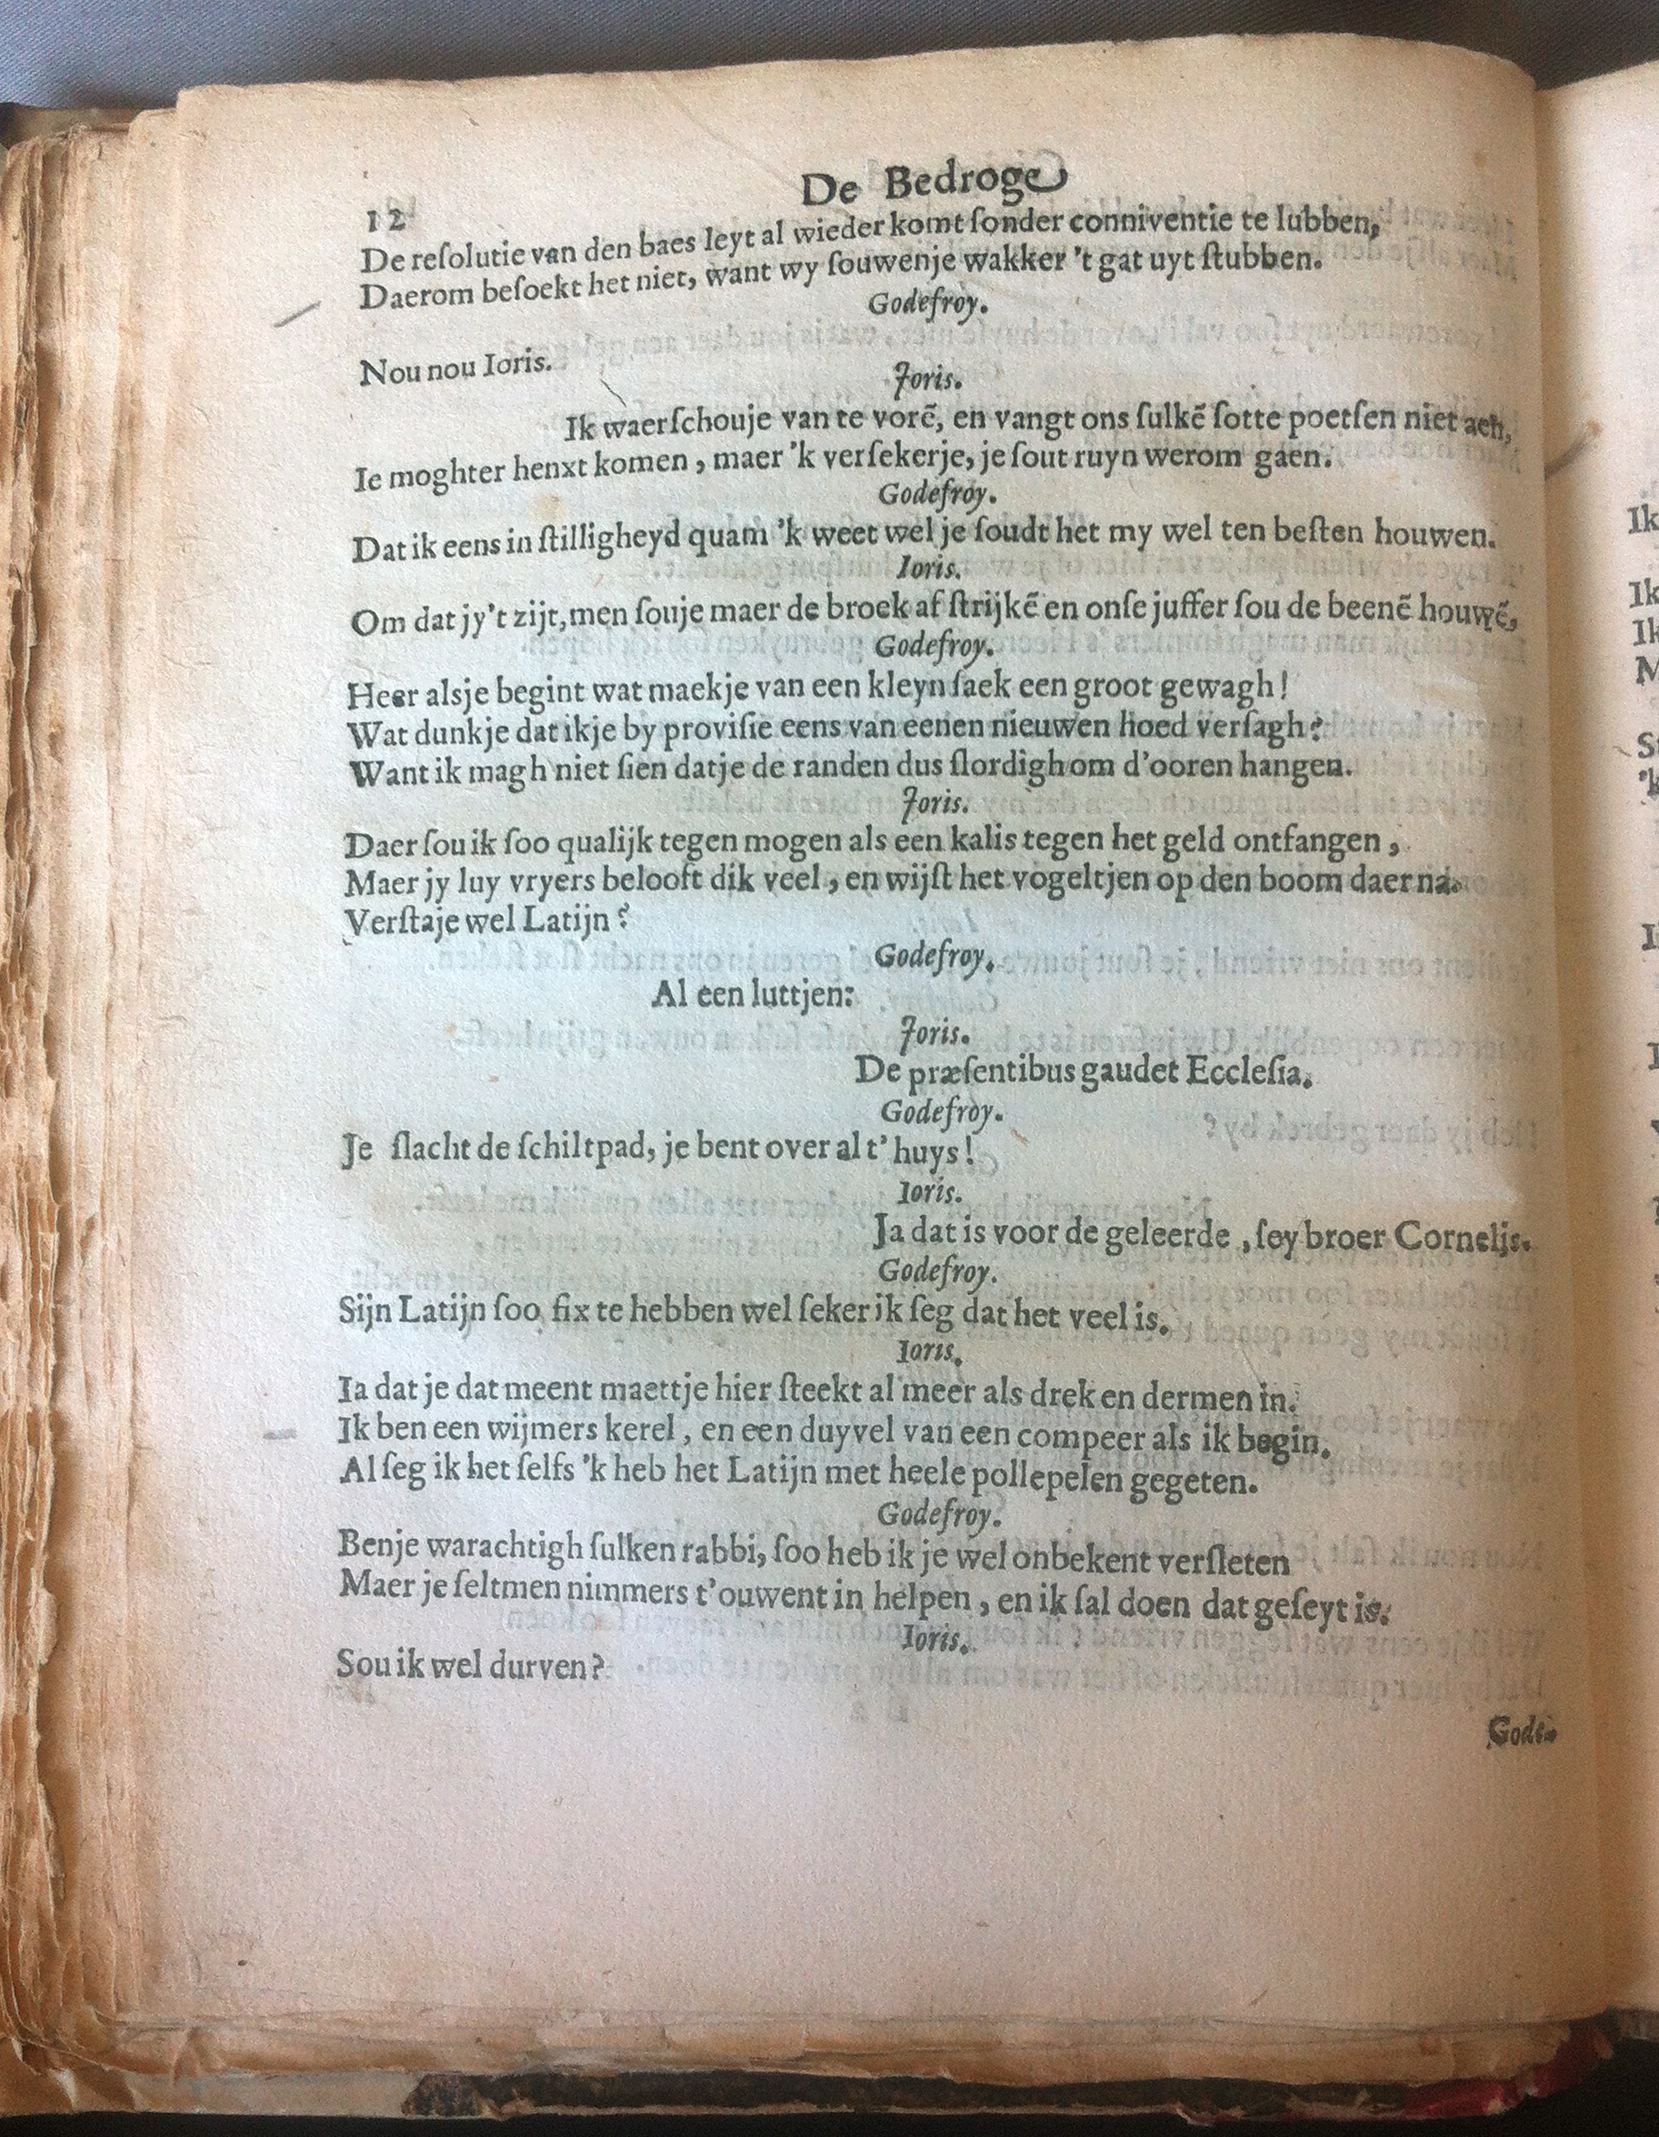 PaffenrodeUlrich1661p12